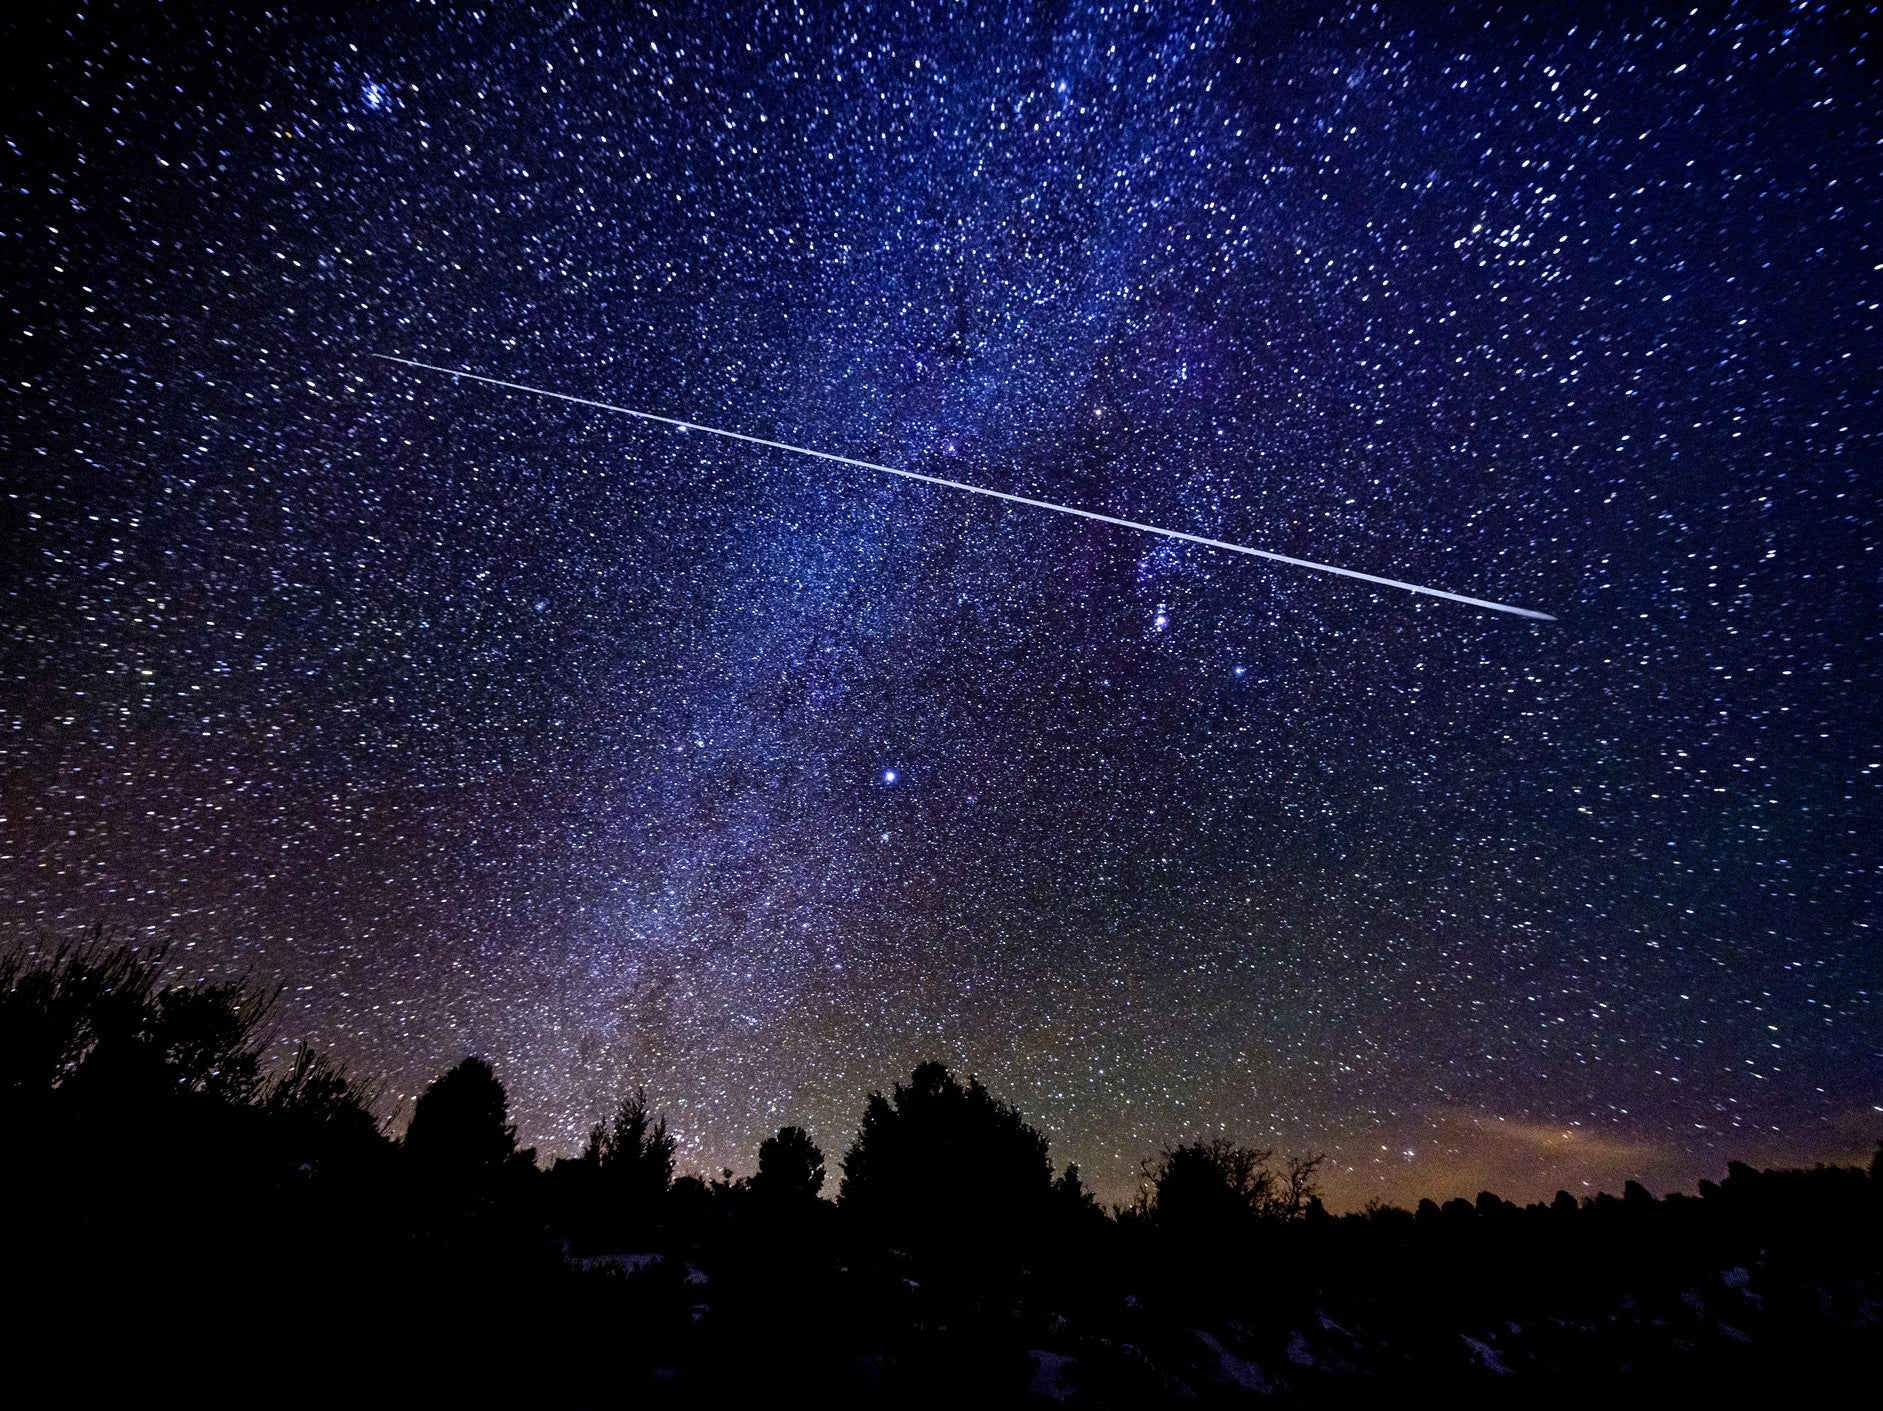 December 2020 will see two separate meteor showers in the night sky